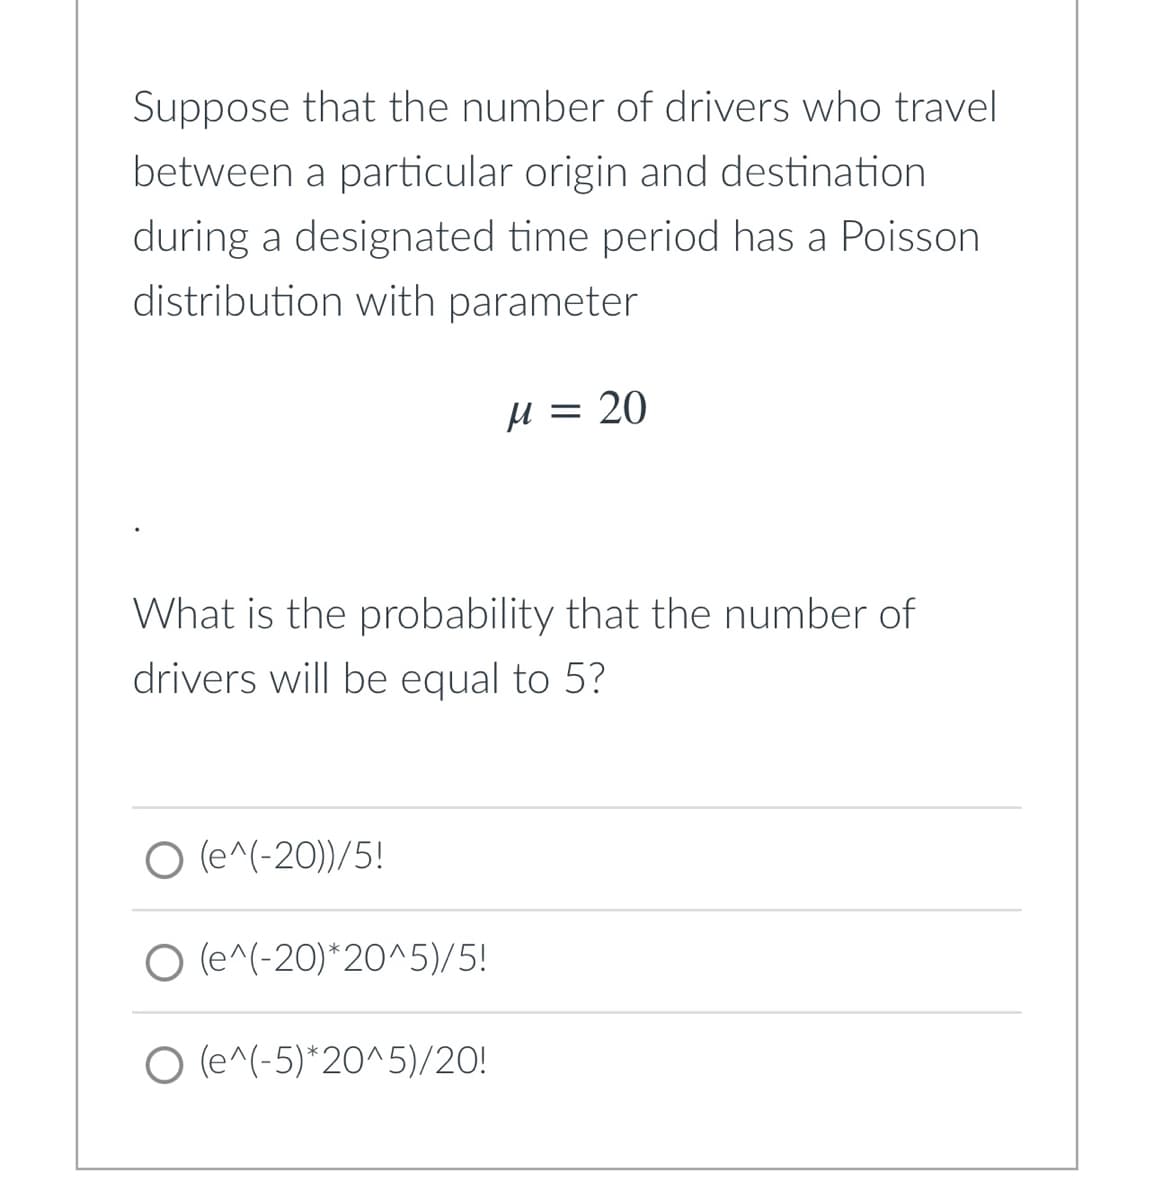 Suppose that the number of drivers who travel
between a particular origin and destination
during a designated time period has a Poisson
distribution with parameter
H = 20
What is the probability that the number of
drivers will be equal to 5?
O (e^(-20))/5!
O (e^(-20)*20^^5)/5!
O (e^(-5)*20^5)/20!
